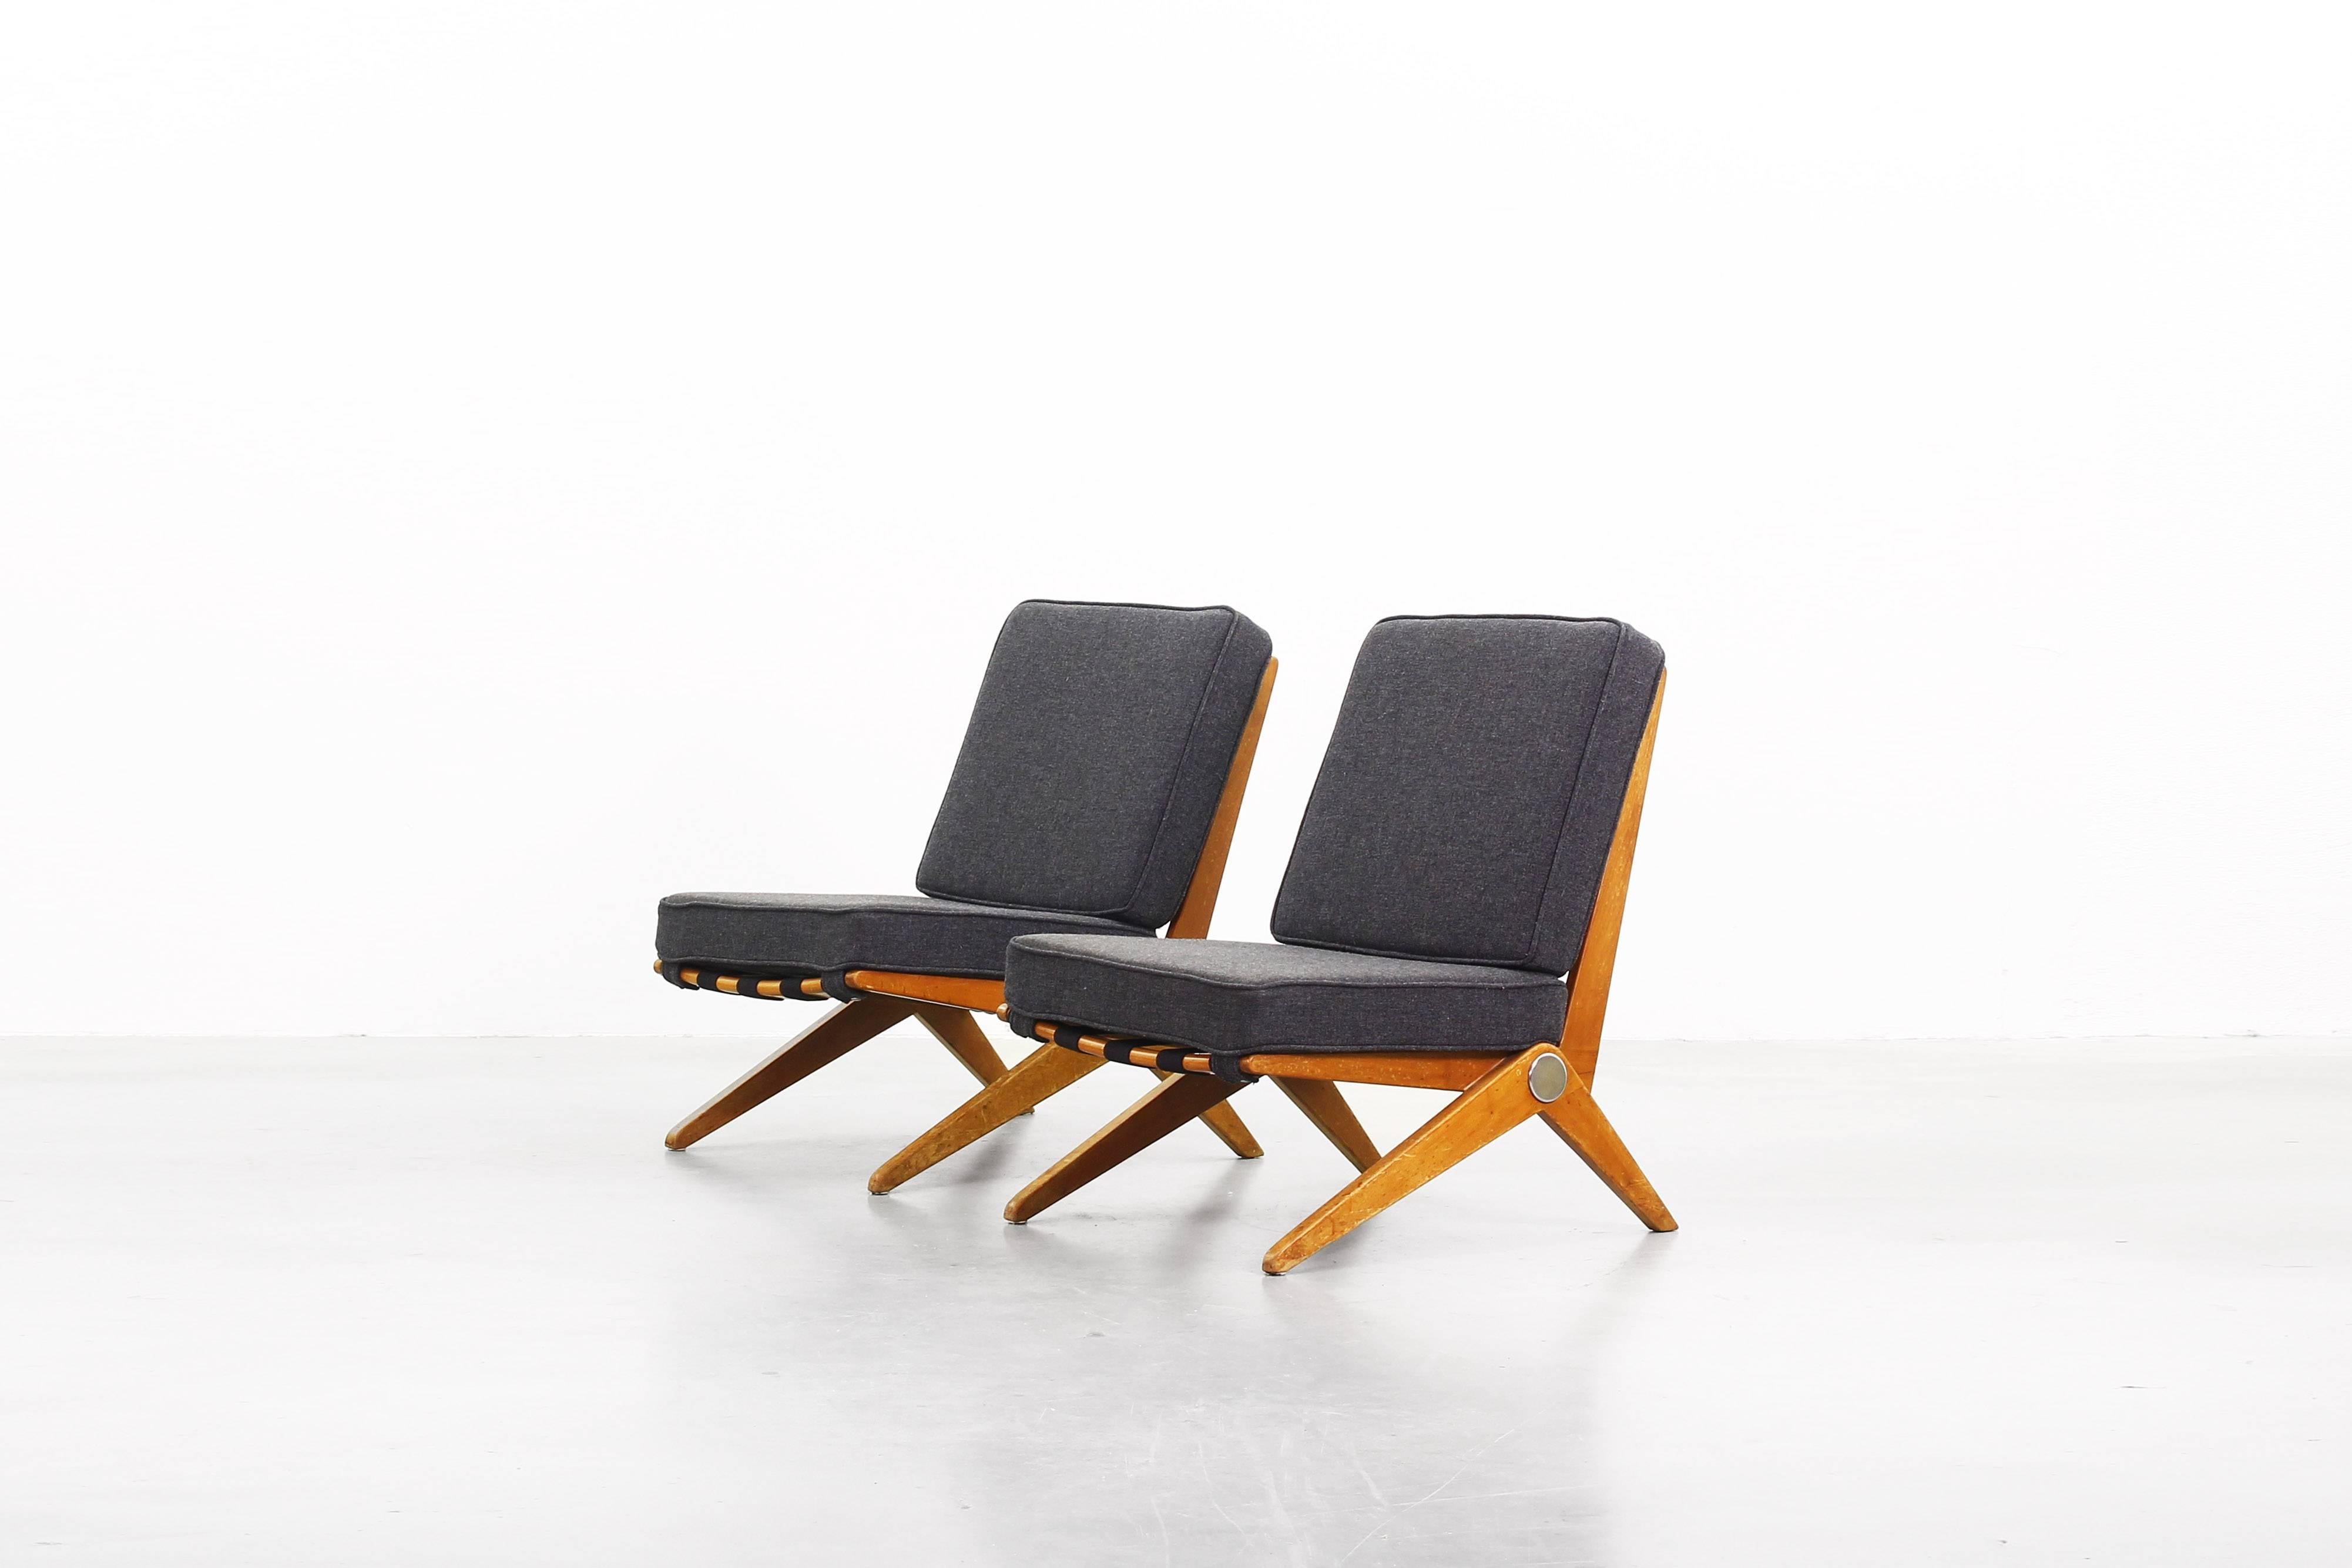 20th Century Pair of Scissor Lounge Chairs by Pierre Jeanneret for Knoll International, 1957